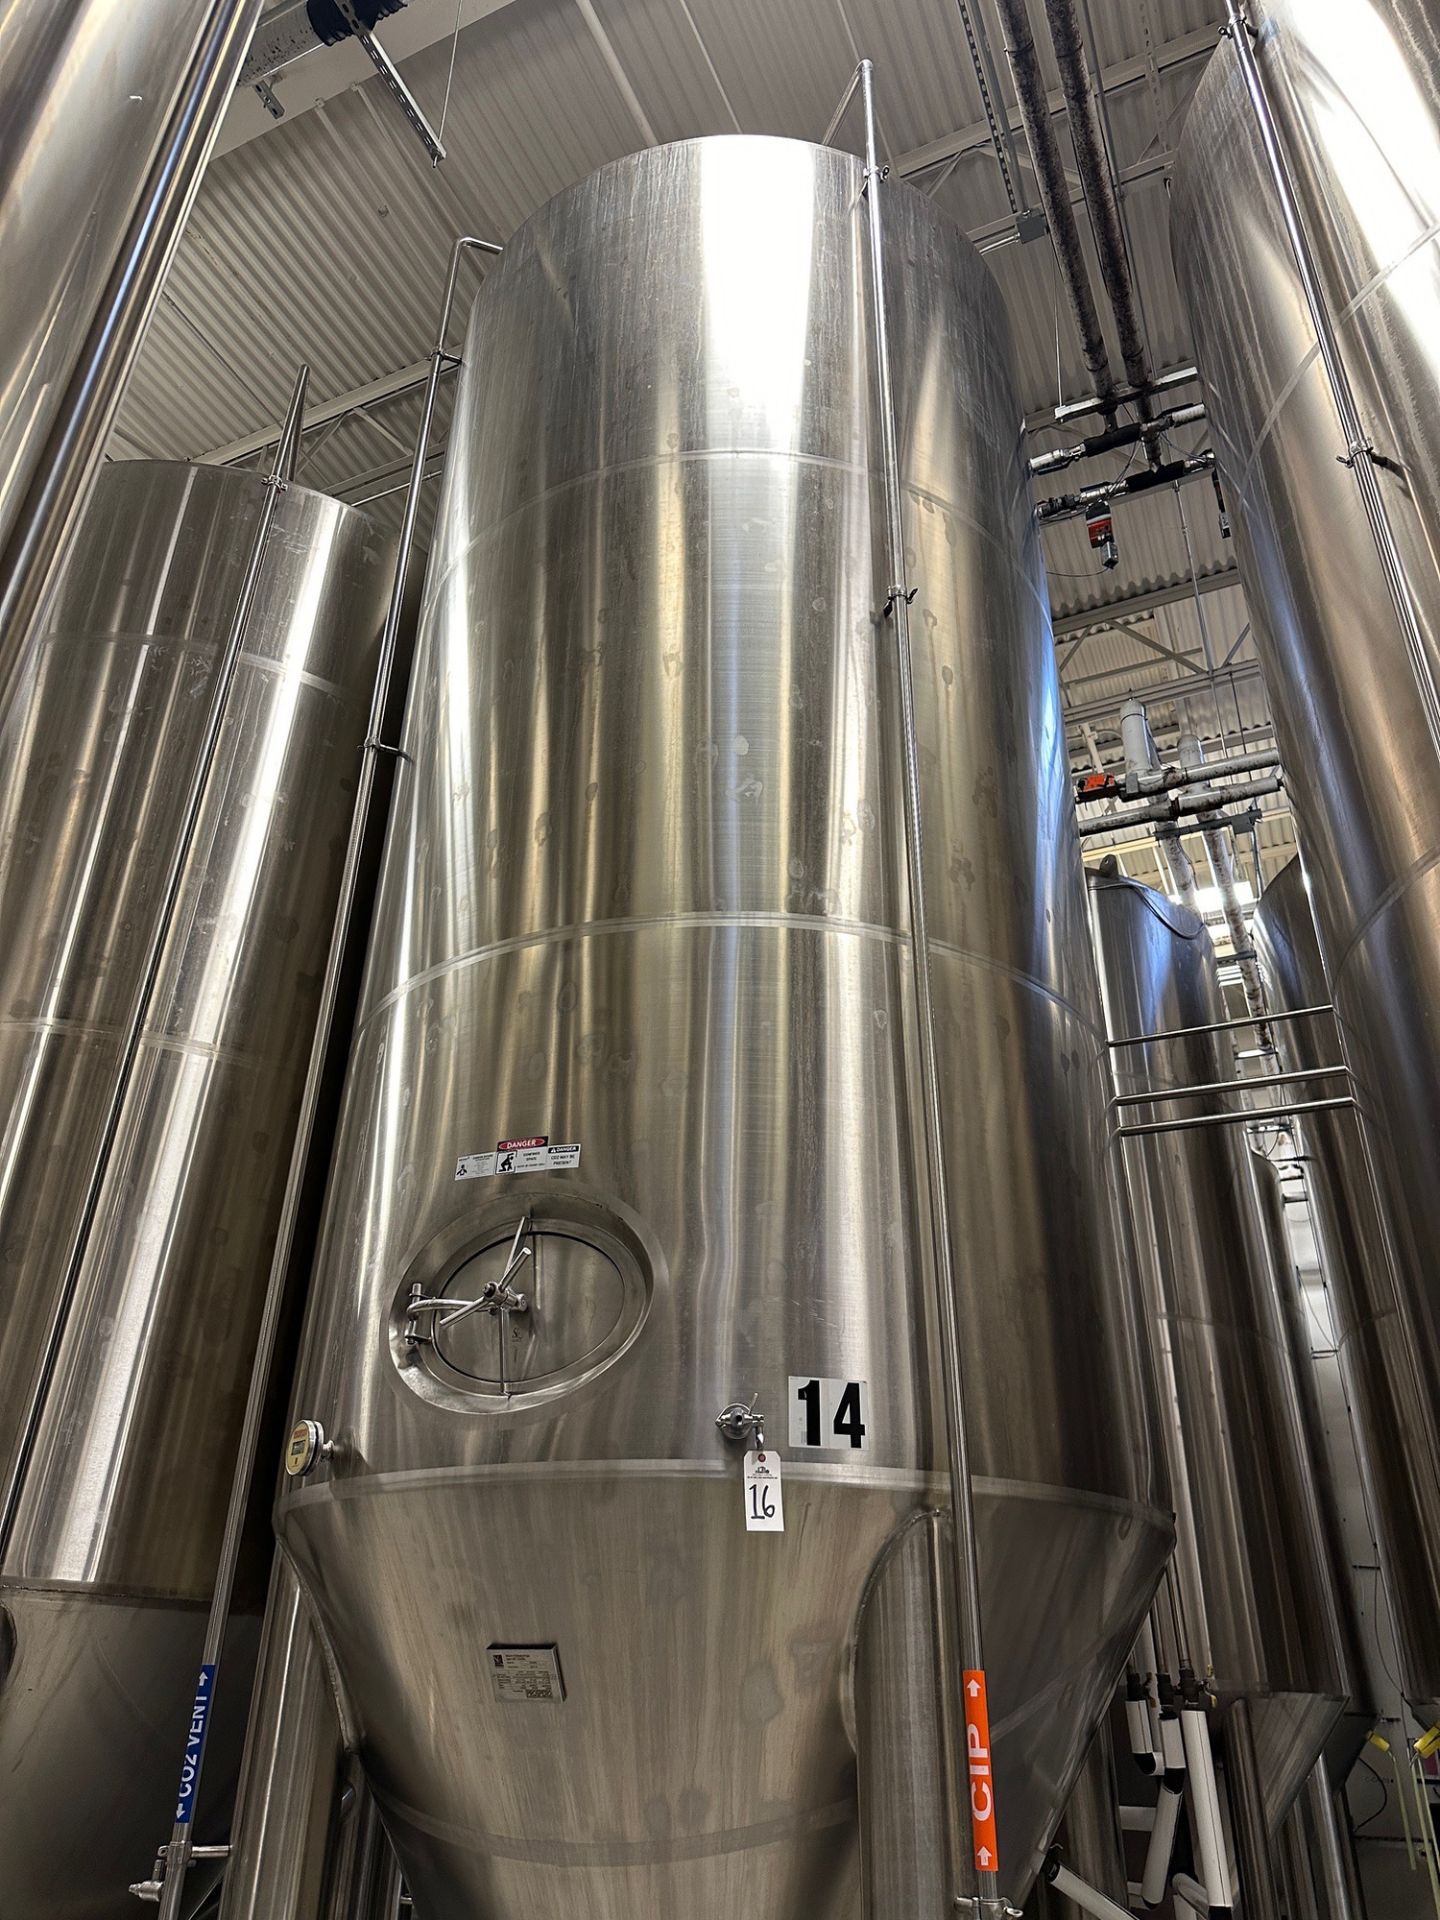 (1 of 8) 2018 Marks 132 BBL FV / 175 BBL or 5,400 Gal Max Capacity Jacketed Stainless Steel Ferm